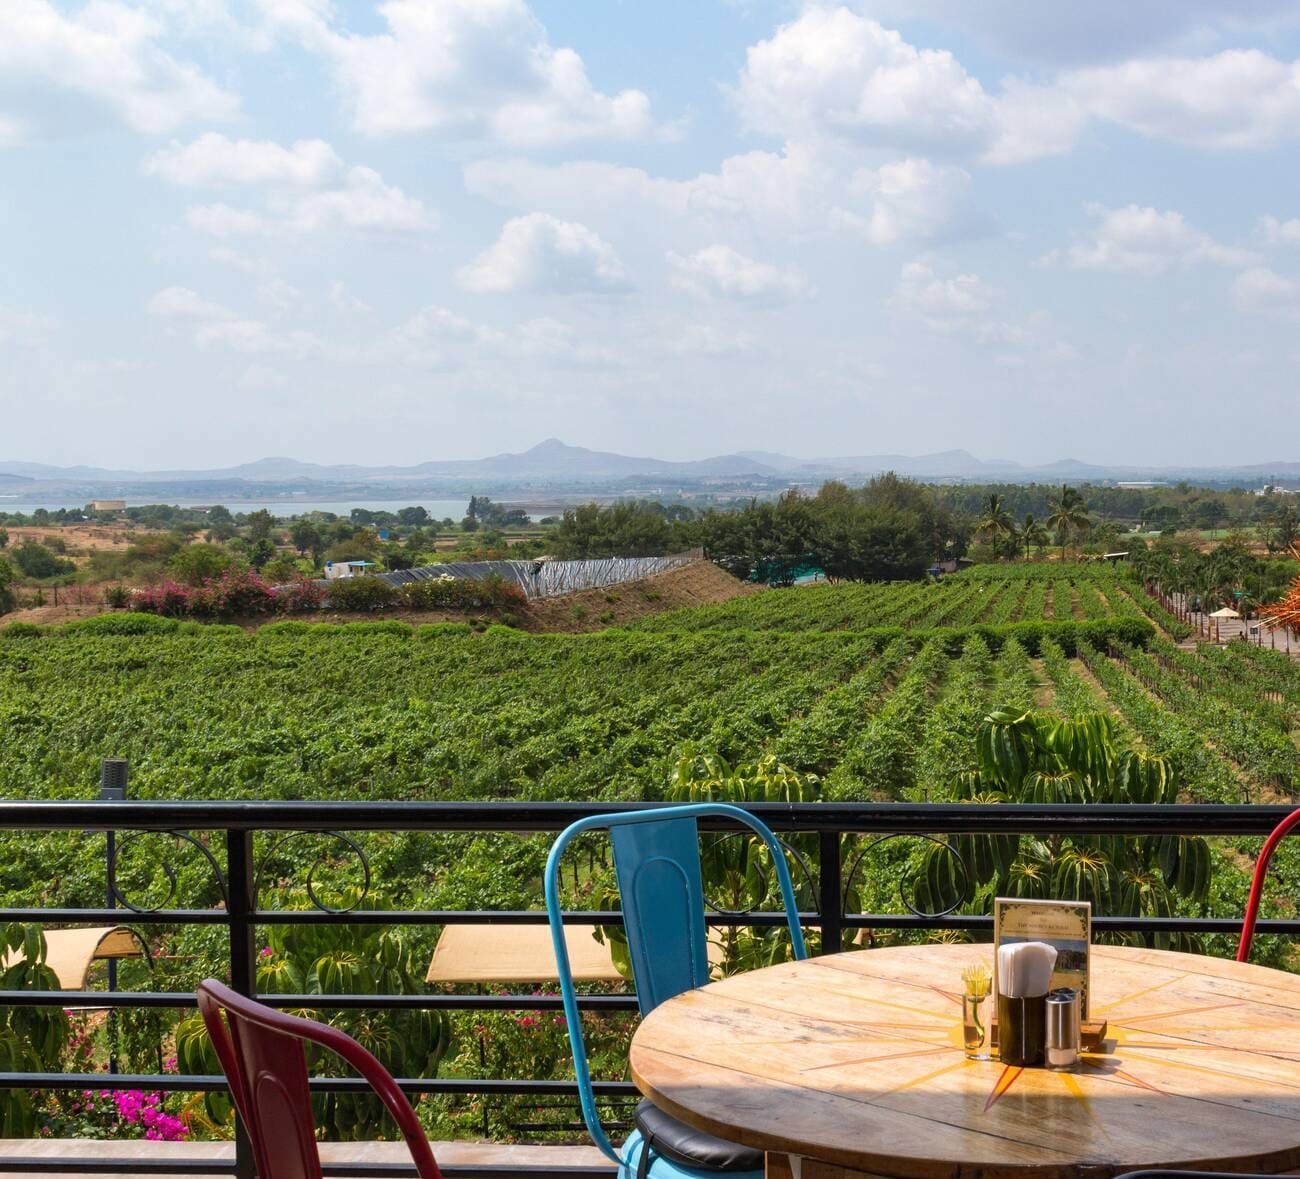 sula-vineyards-explore-the-heart-of-wine-country